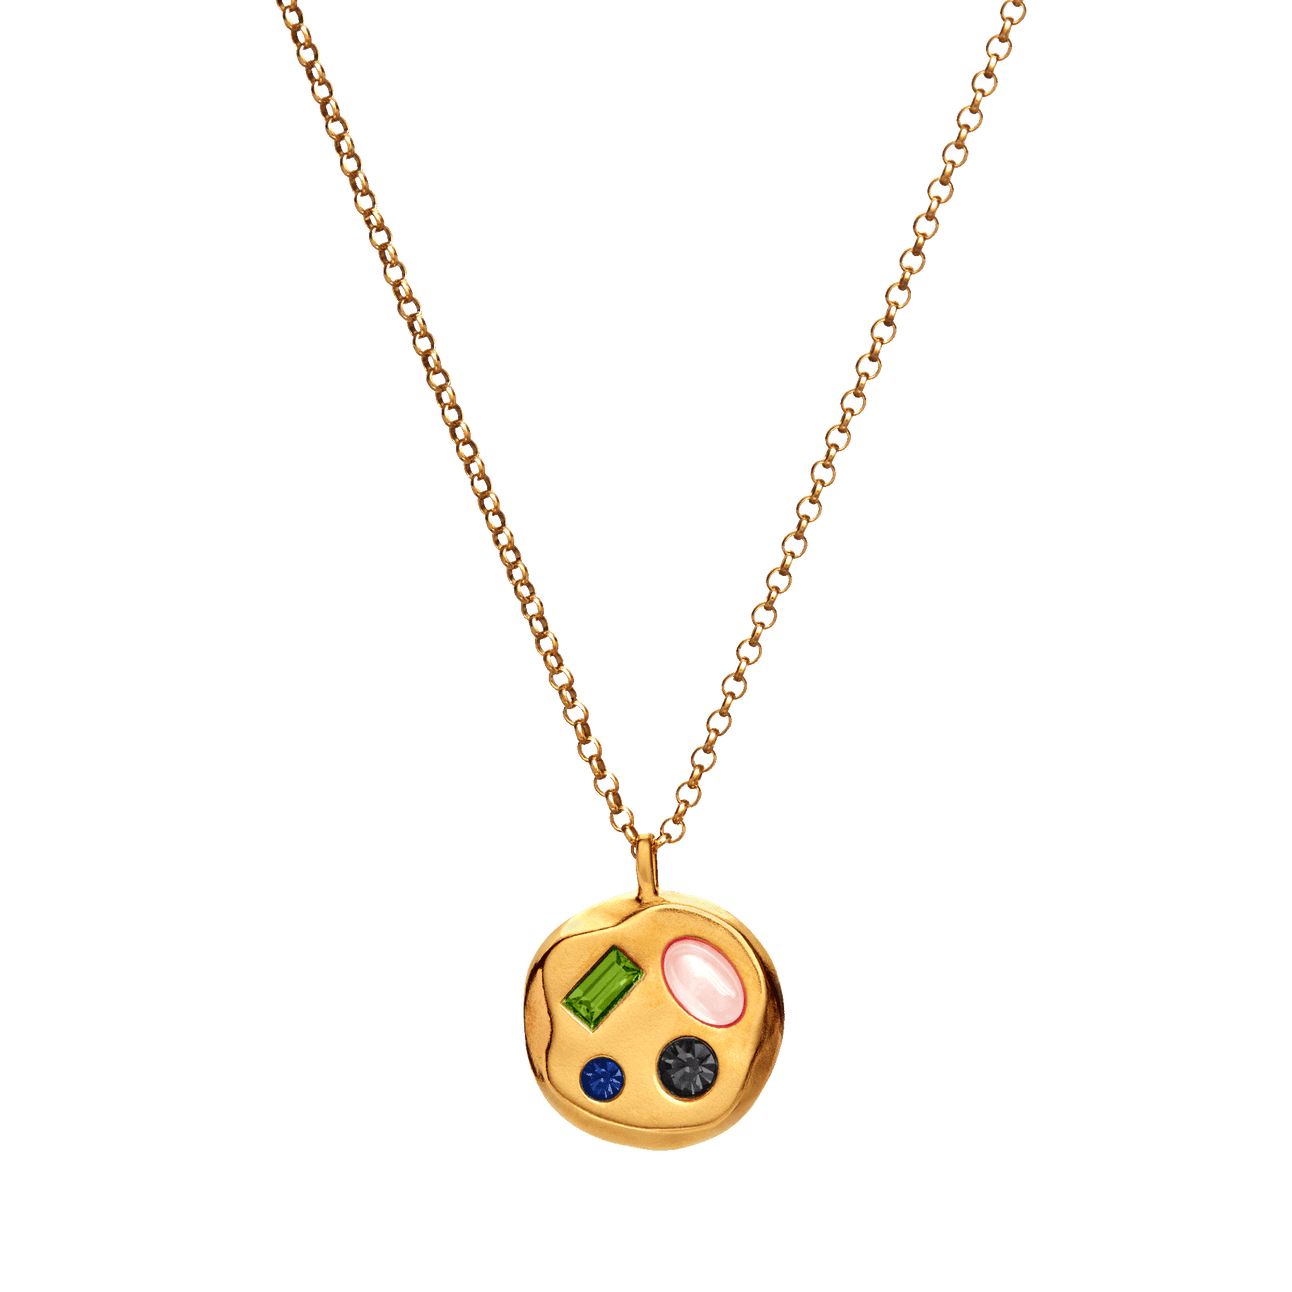 The August First Pendant